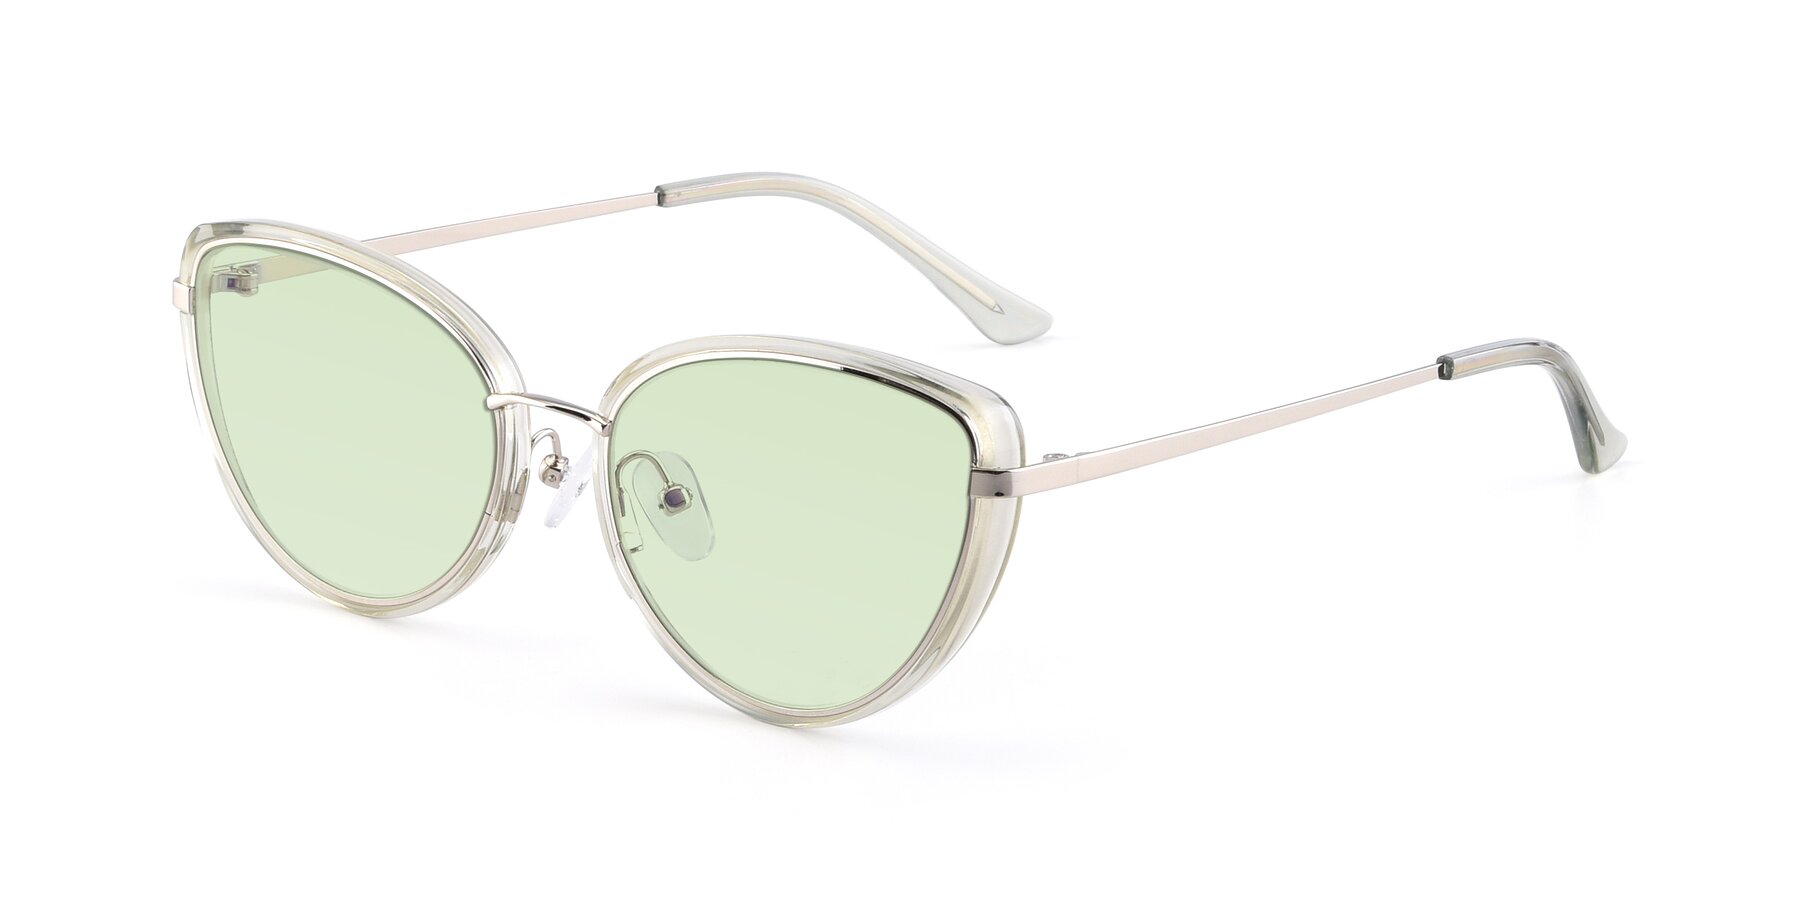 Angle of 17706 in Transparent Green-Silver with Light Green Tinted Lenses